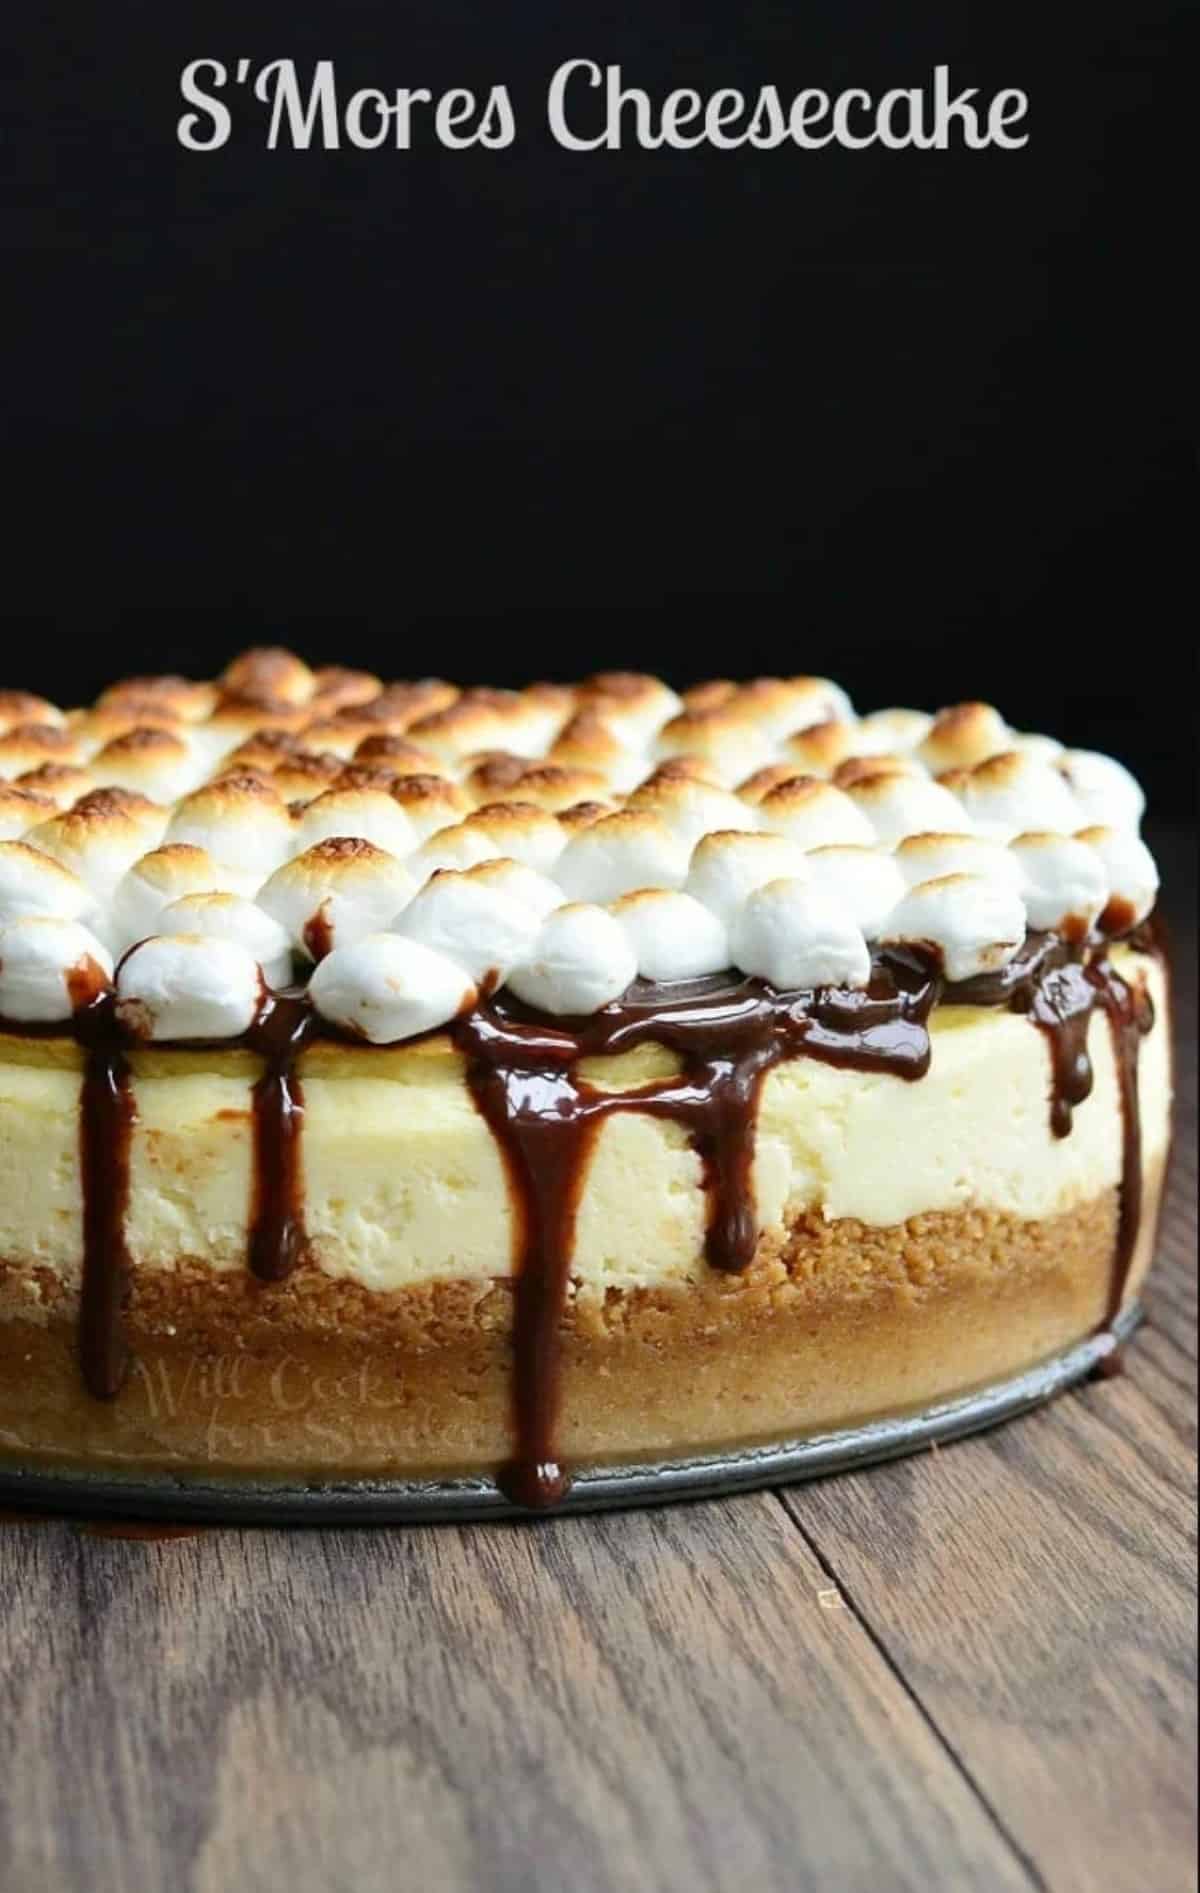 a whole smores cheesecake with chocolate dripping off the sides and marshmallows.